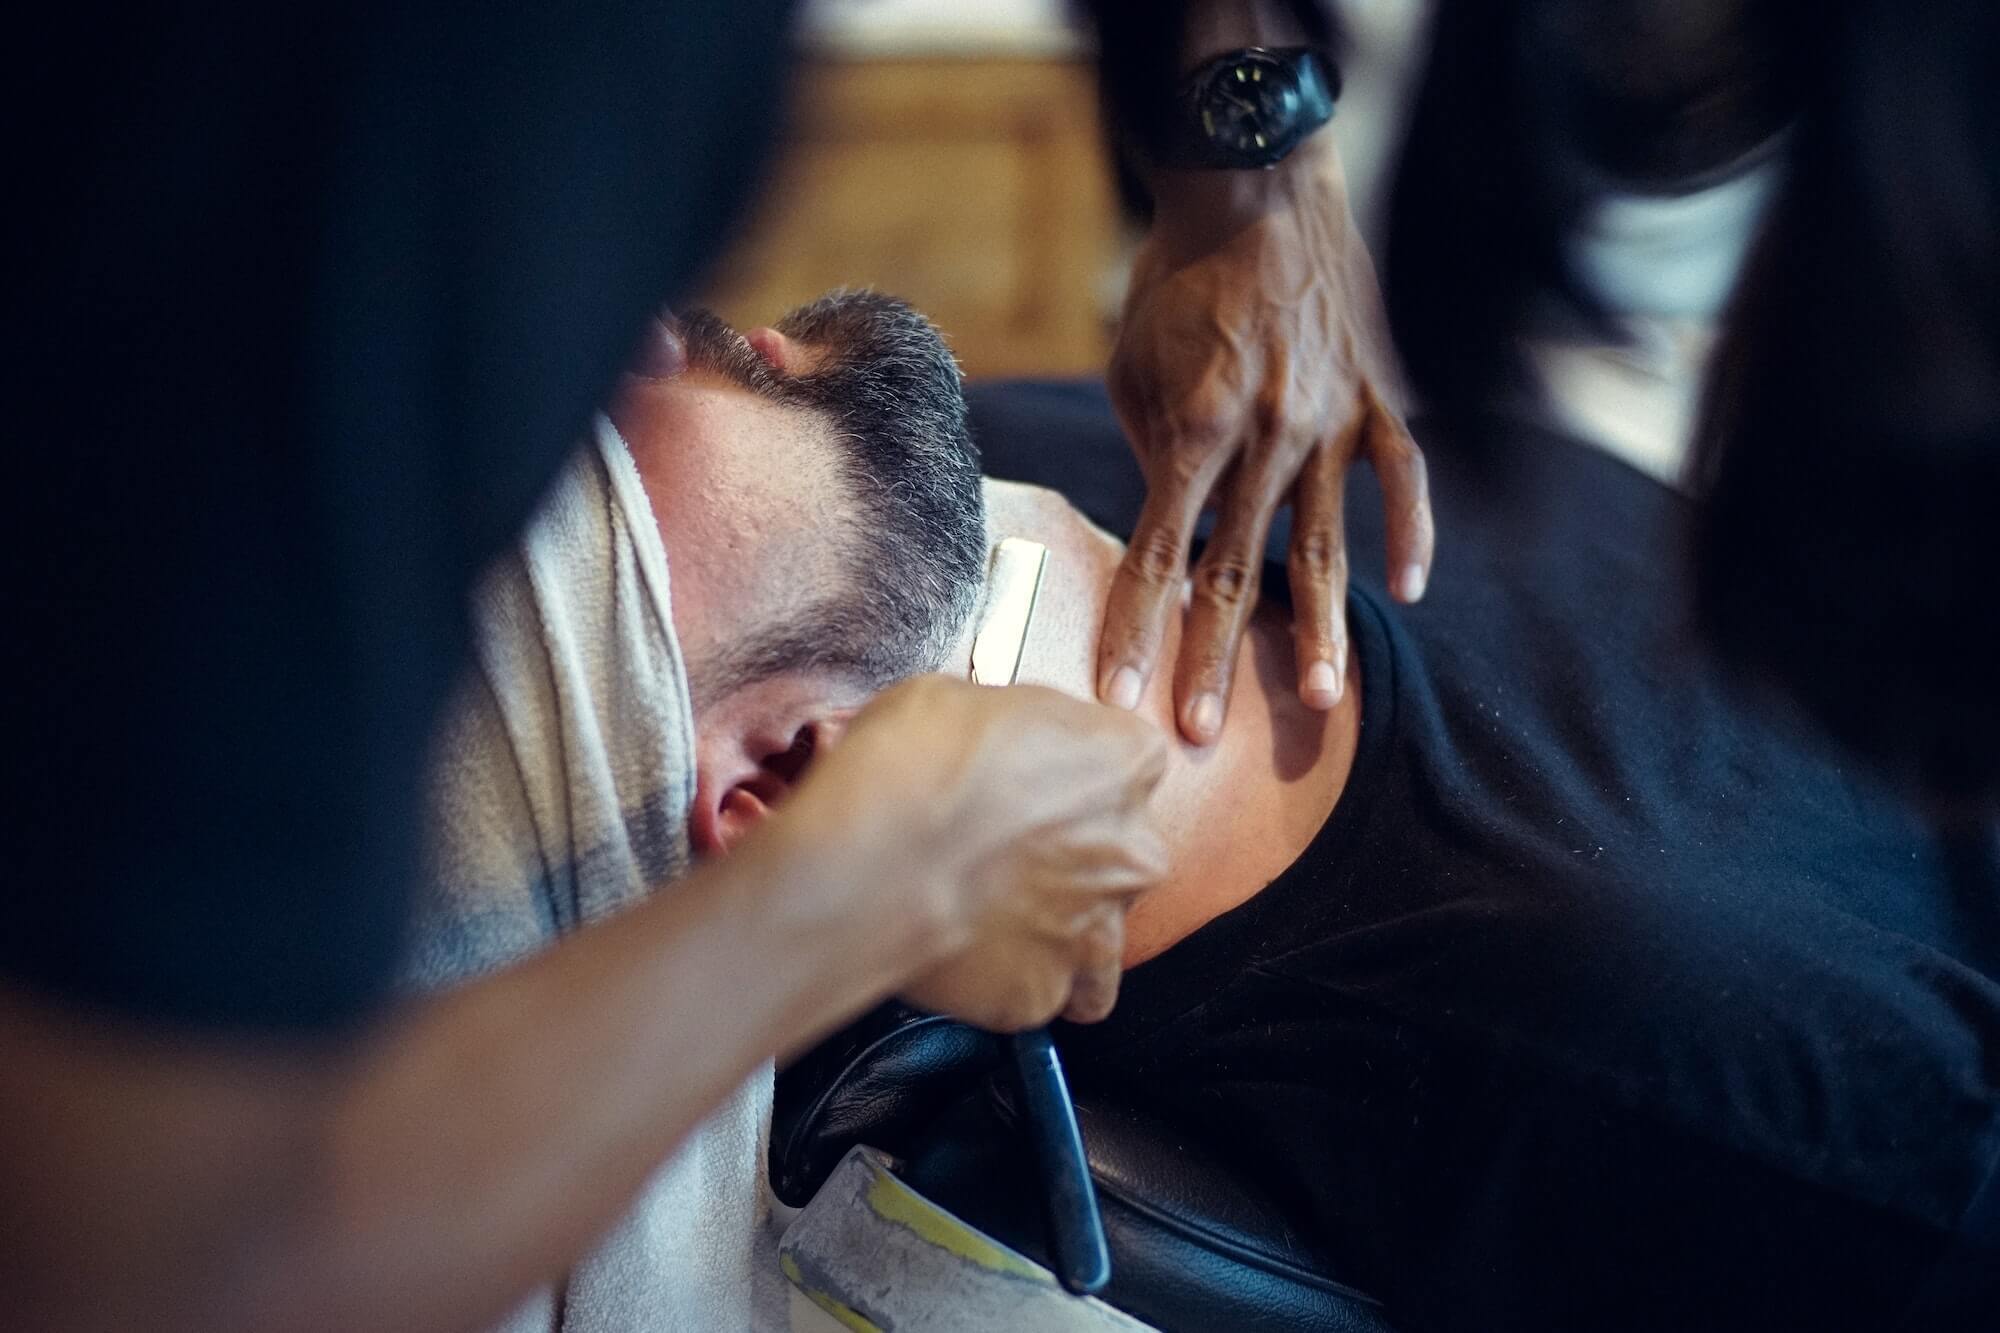 Man with beard receiving barbershop shave with straight razor